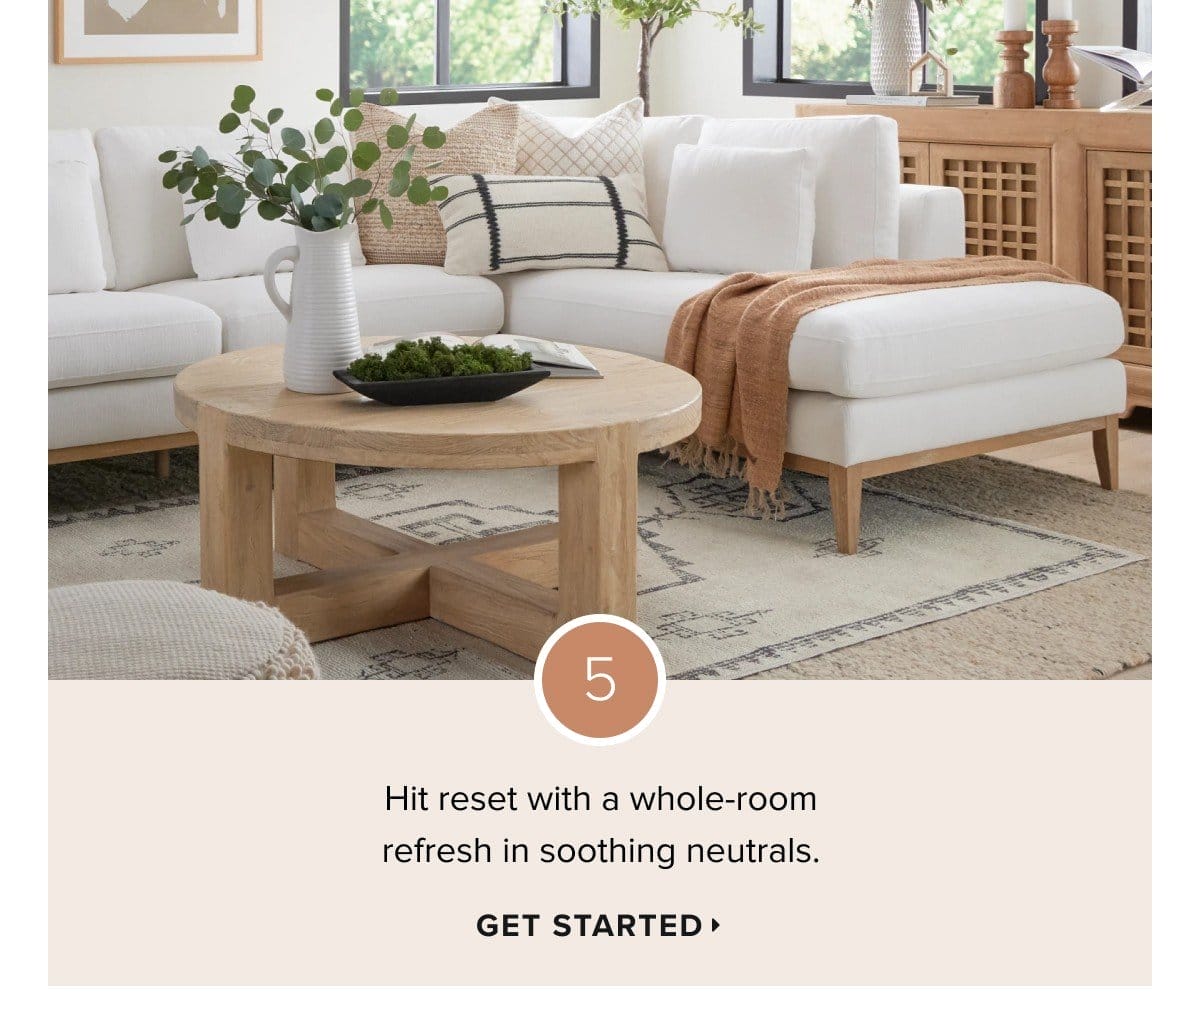 5. hit reset with a whole-room refresh in soothing neutrals.